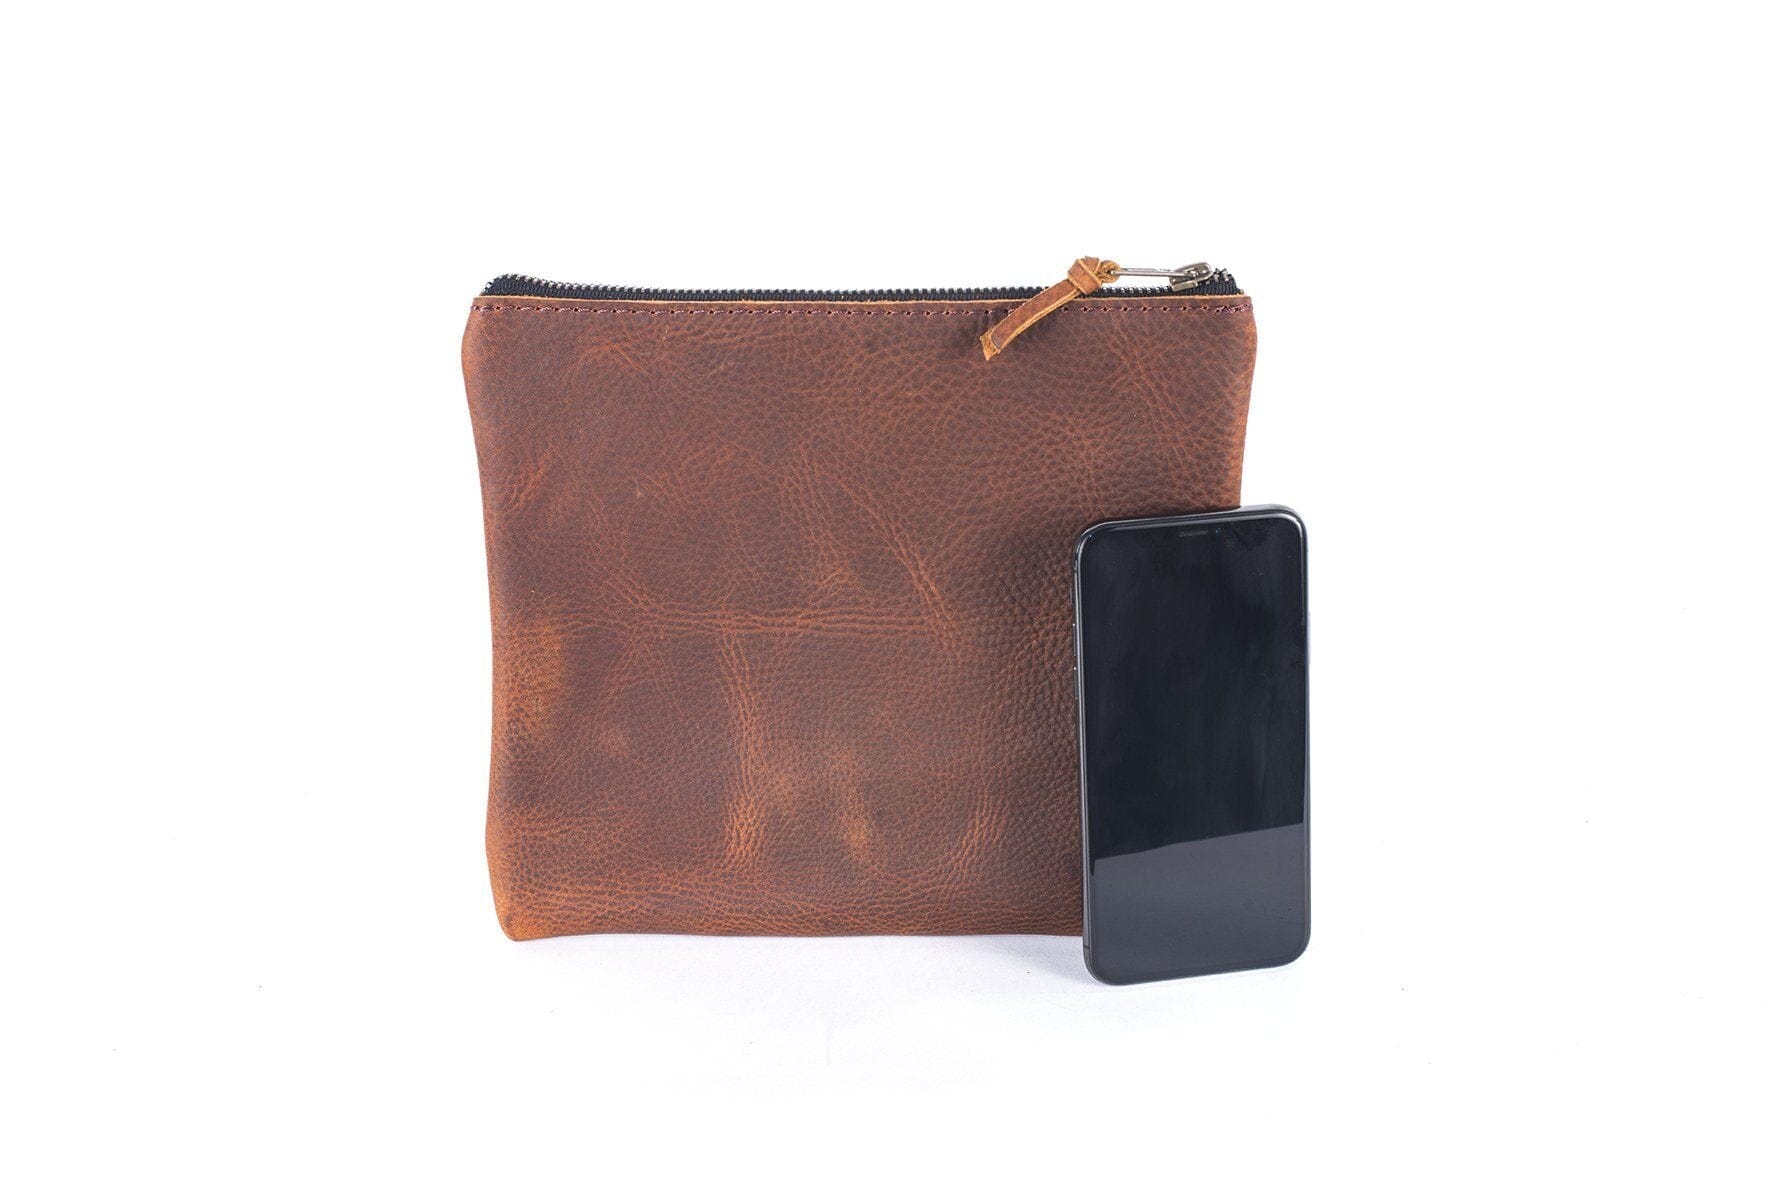 LEATHER TOP ZIPPER POUCH - RUSTIC PECAN (READY TO SHIP)